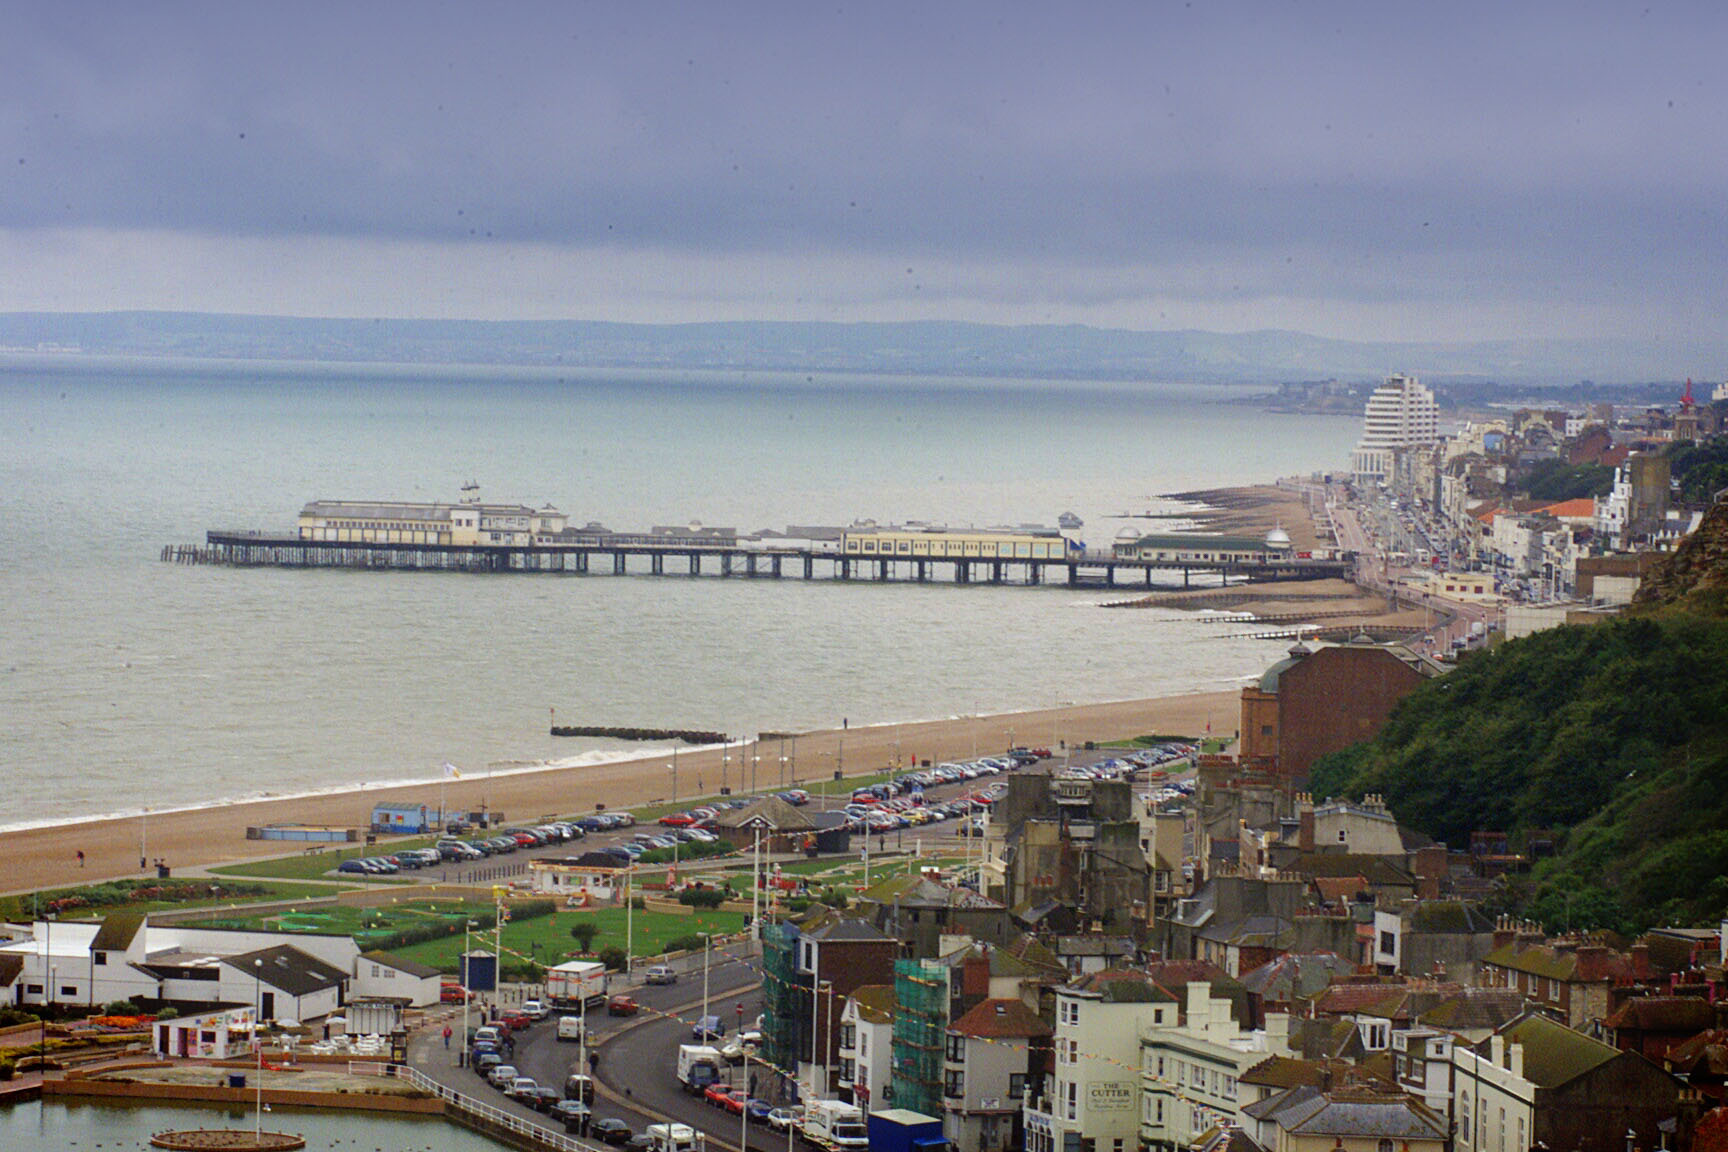 Hastings has recorded one of the lowest coronavirus rates in England, Public Health England figures show